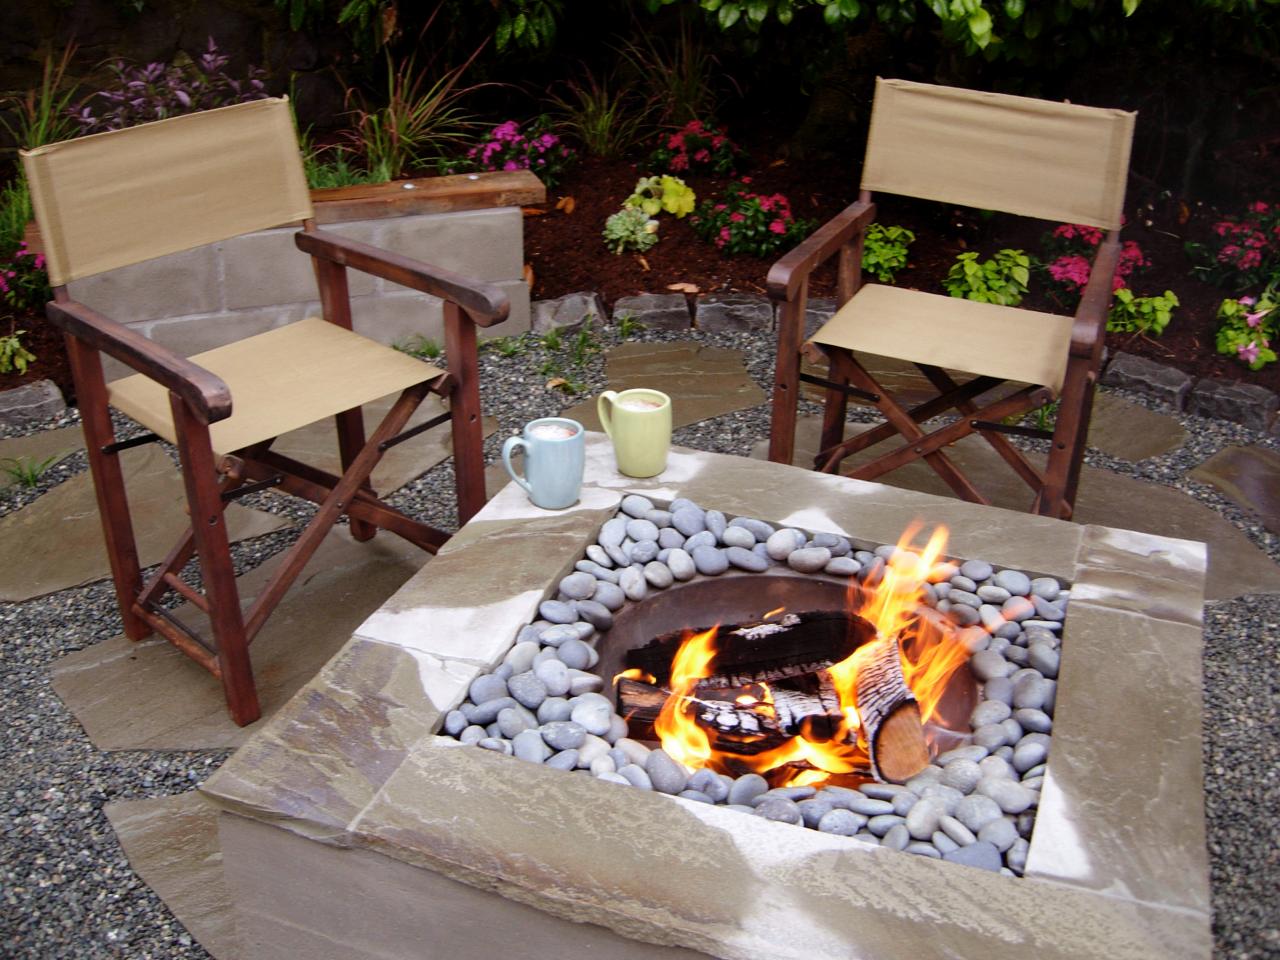 How To Make A Concrete Fire Feature, Outdoor Fire Pit Tiles